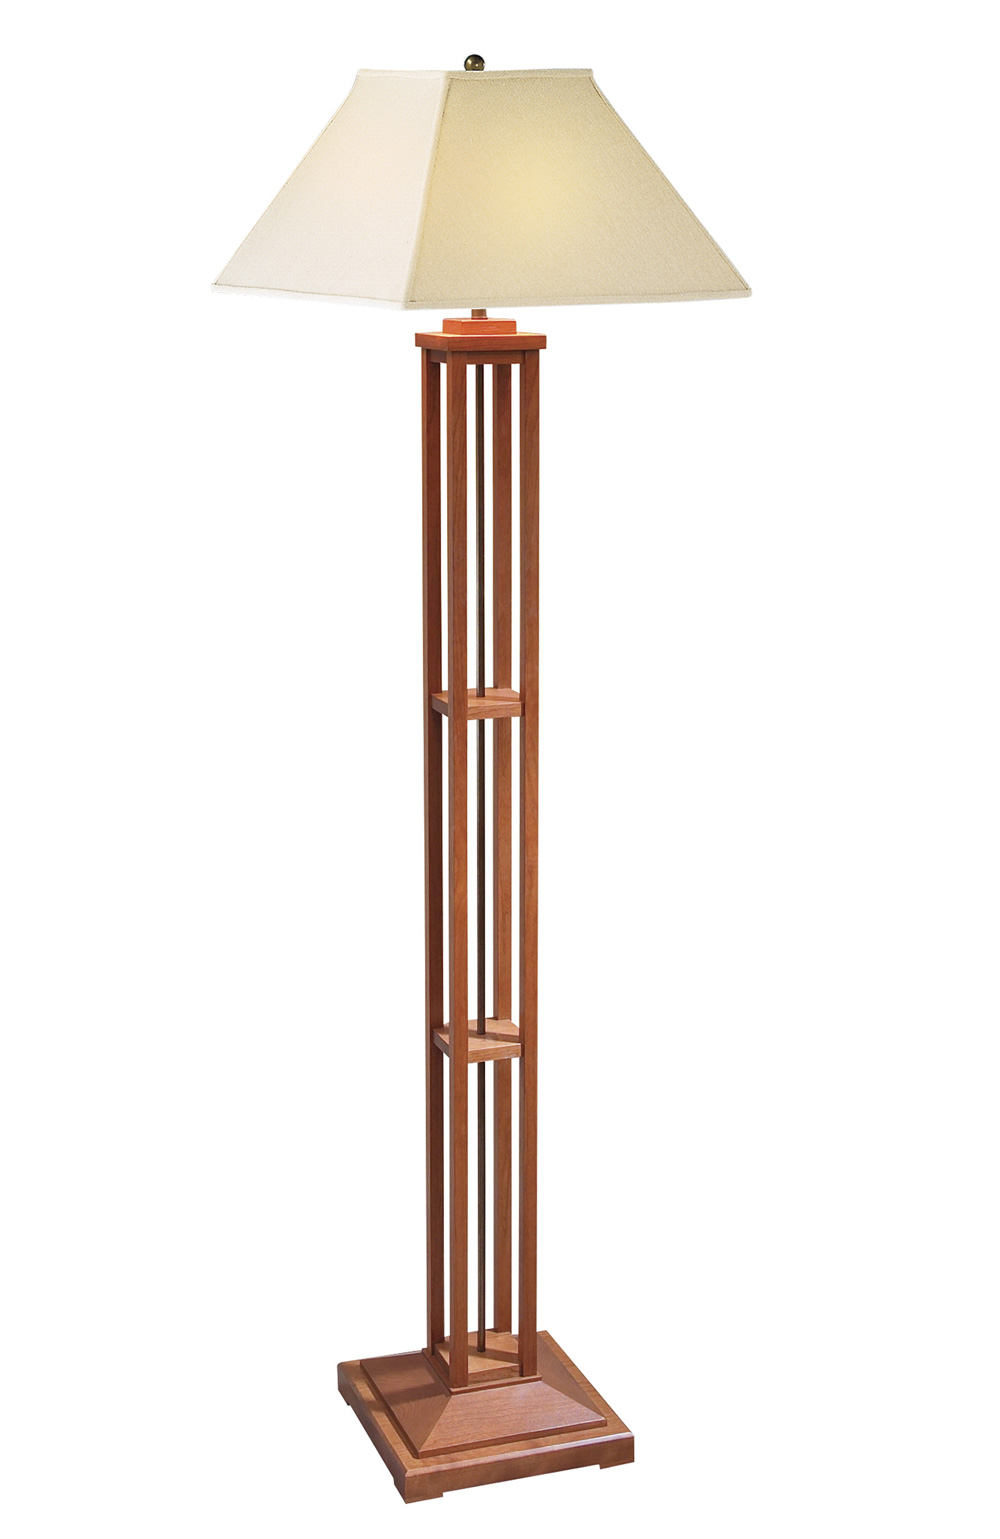 Stickley floor lamp with Linen Shade